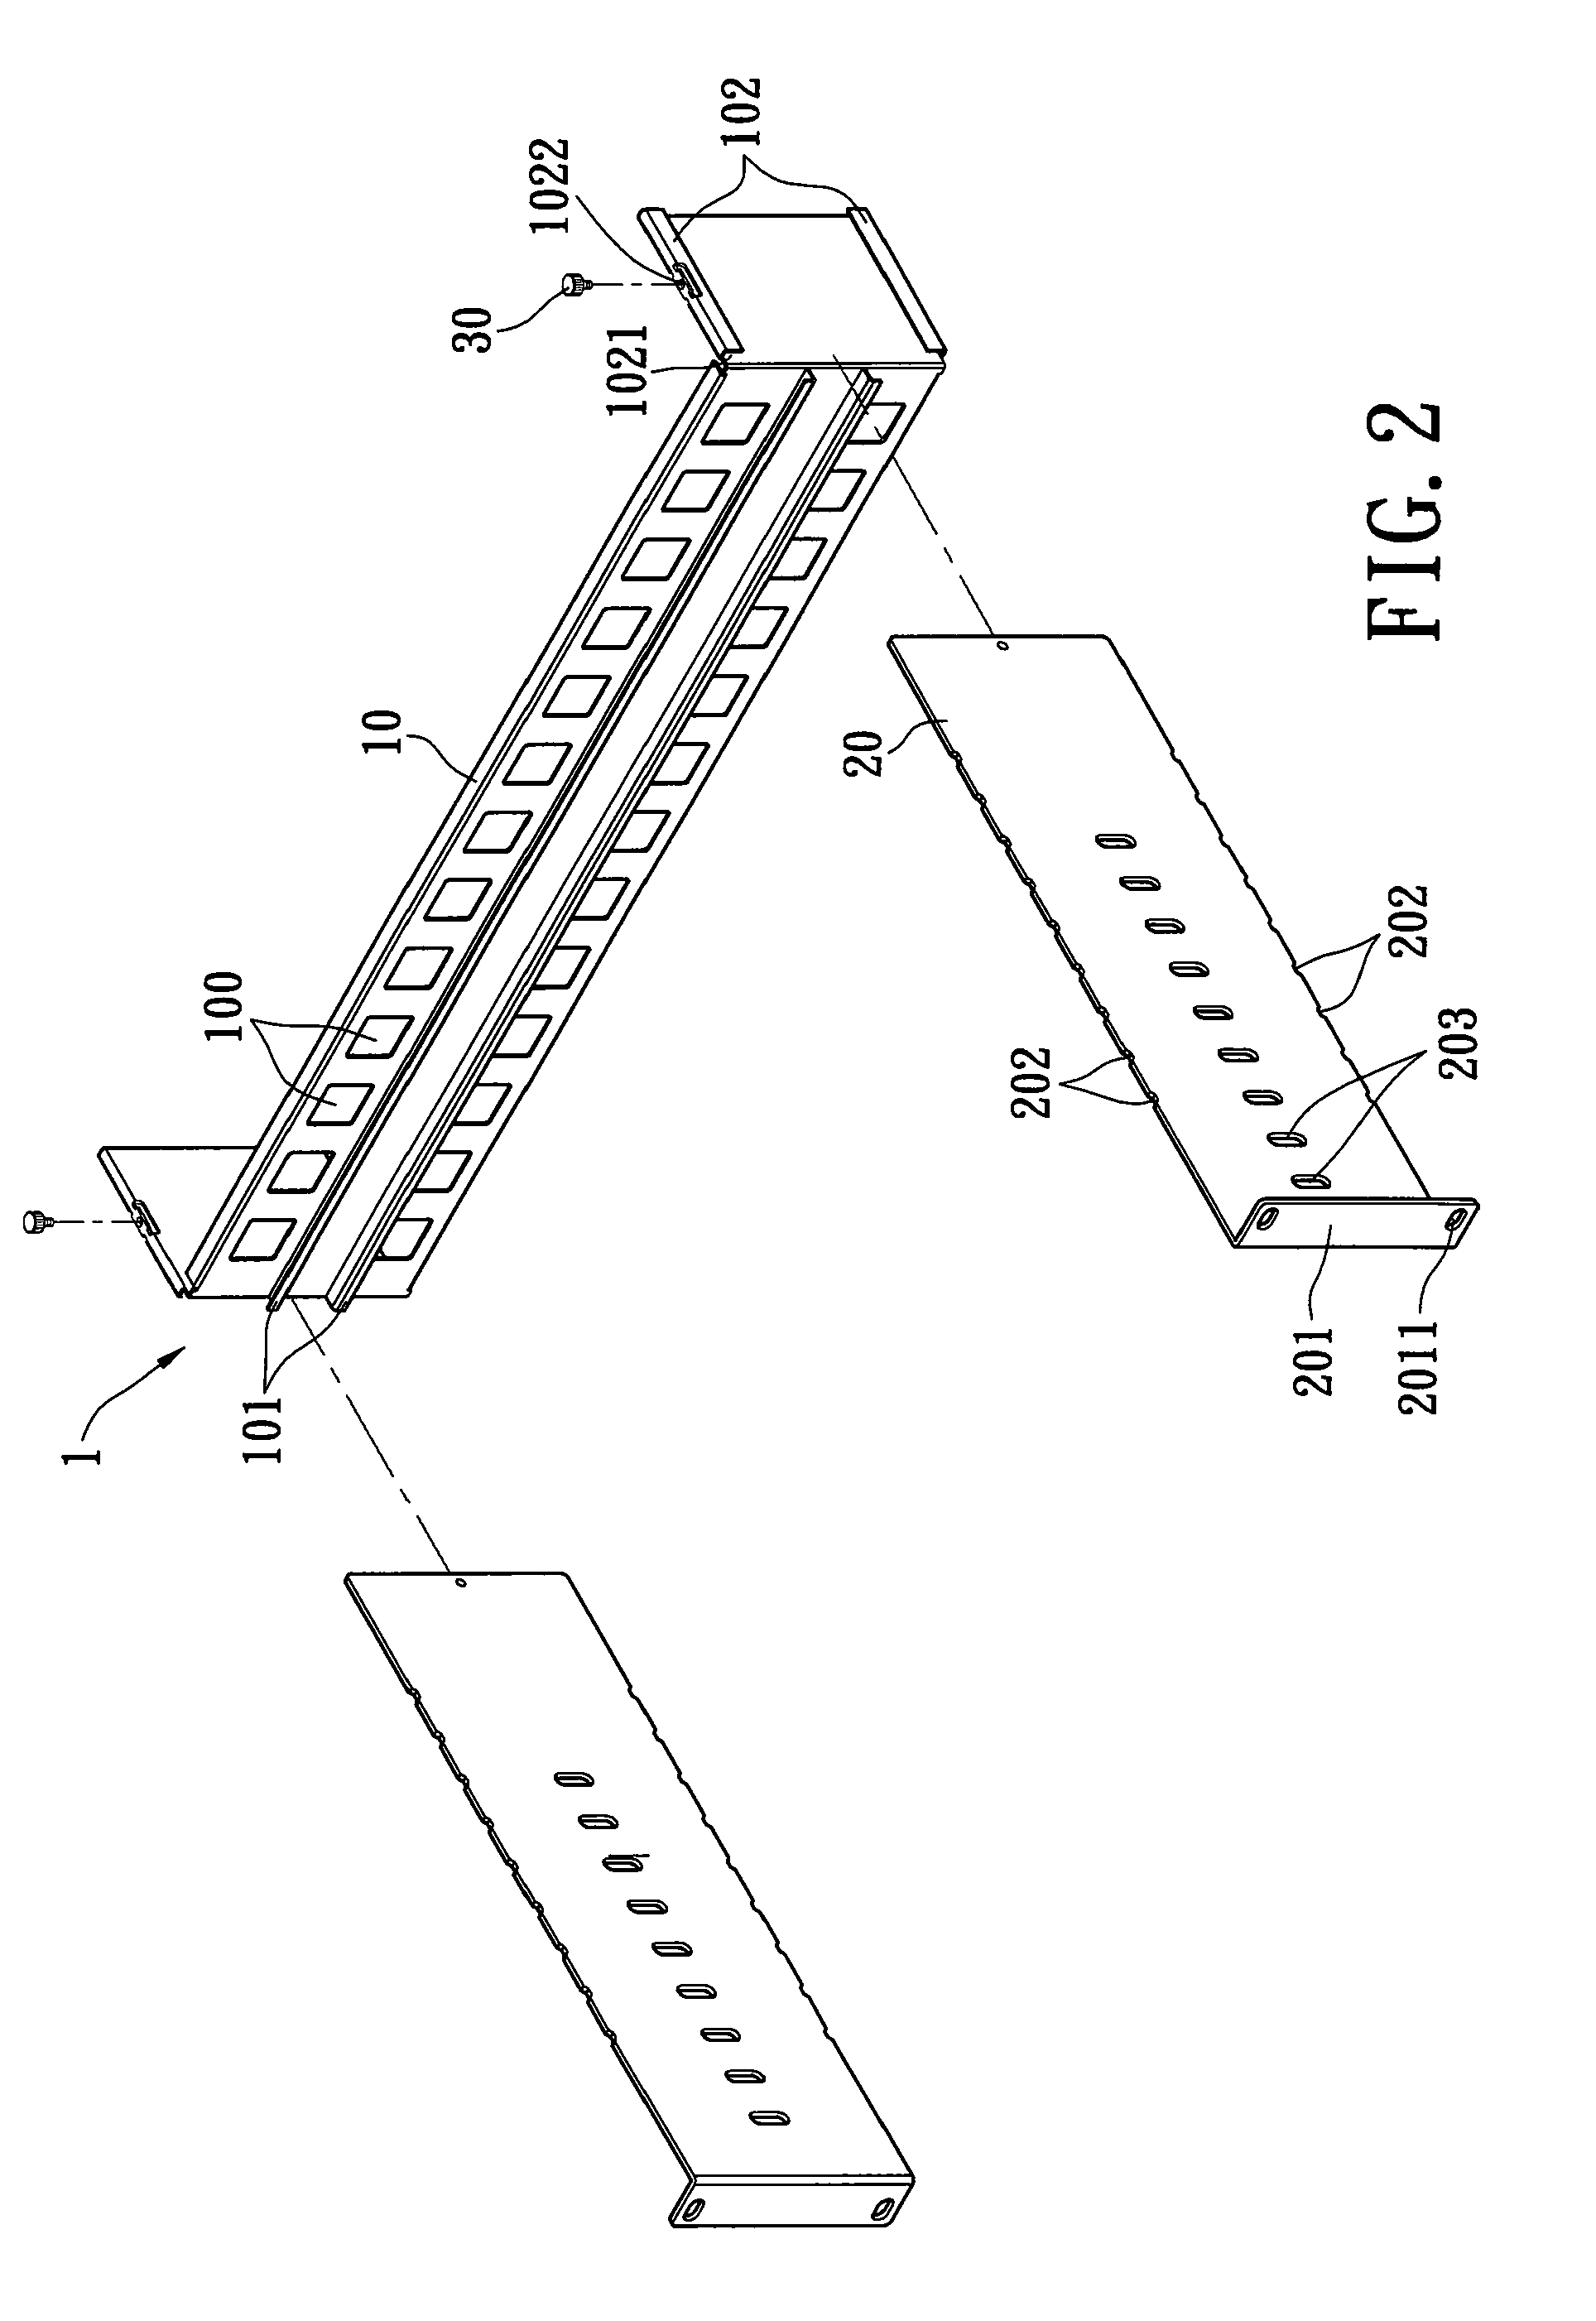 Adjustable housing frame with industrial rails for adjusting the depth of communication apparatus within a housing cabinet